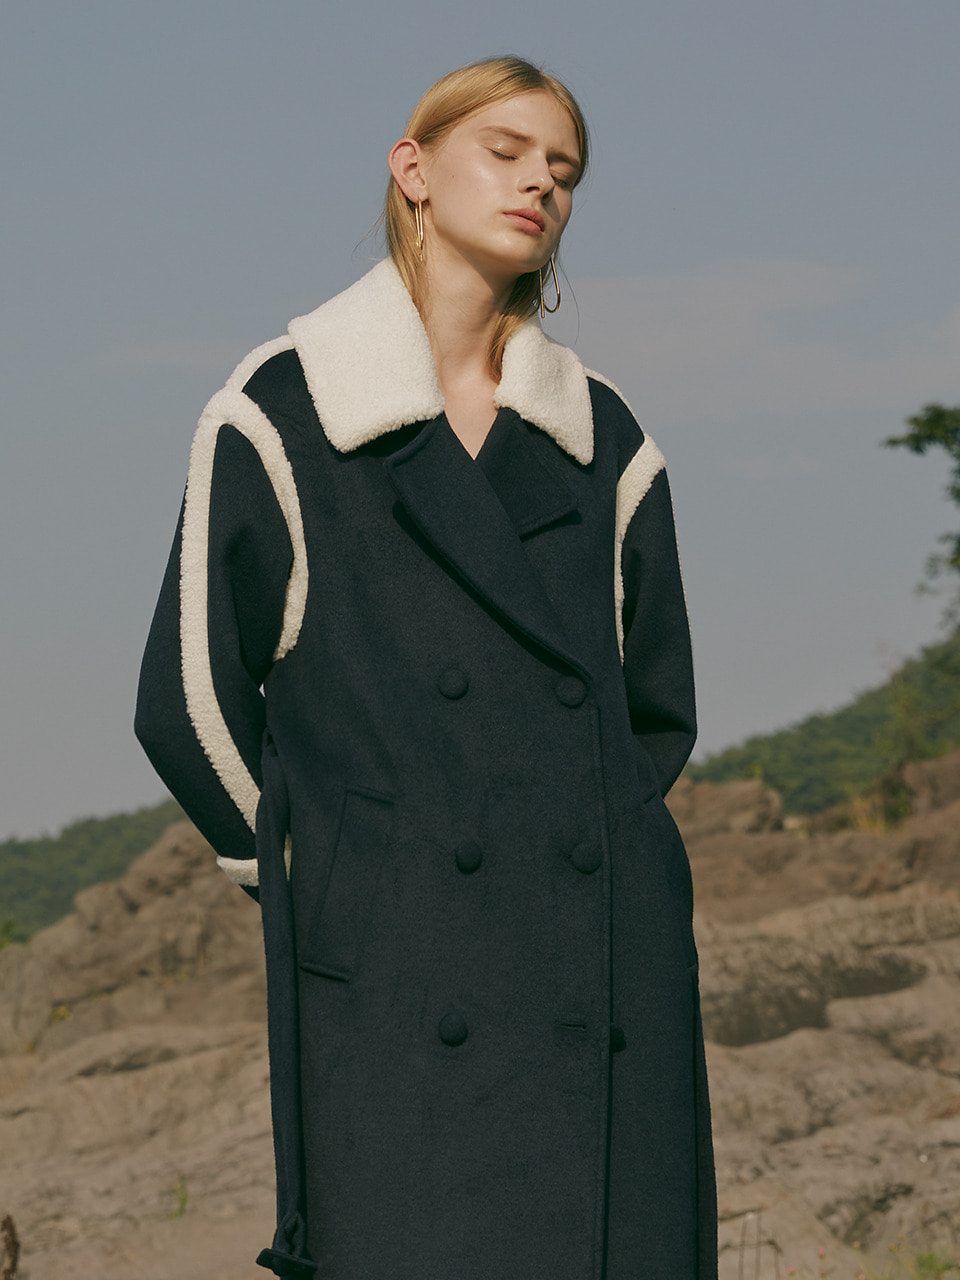 Wool blend contrast shearing lined coat in navy